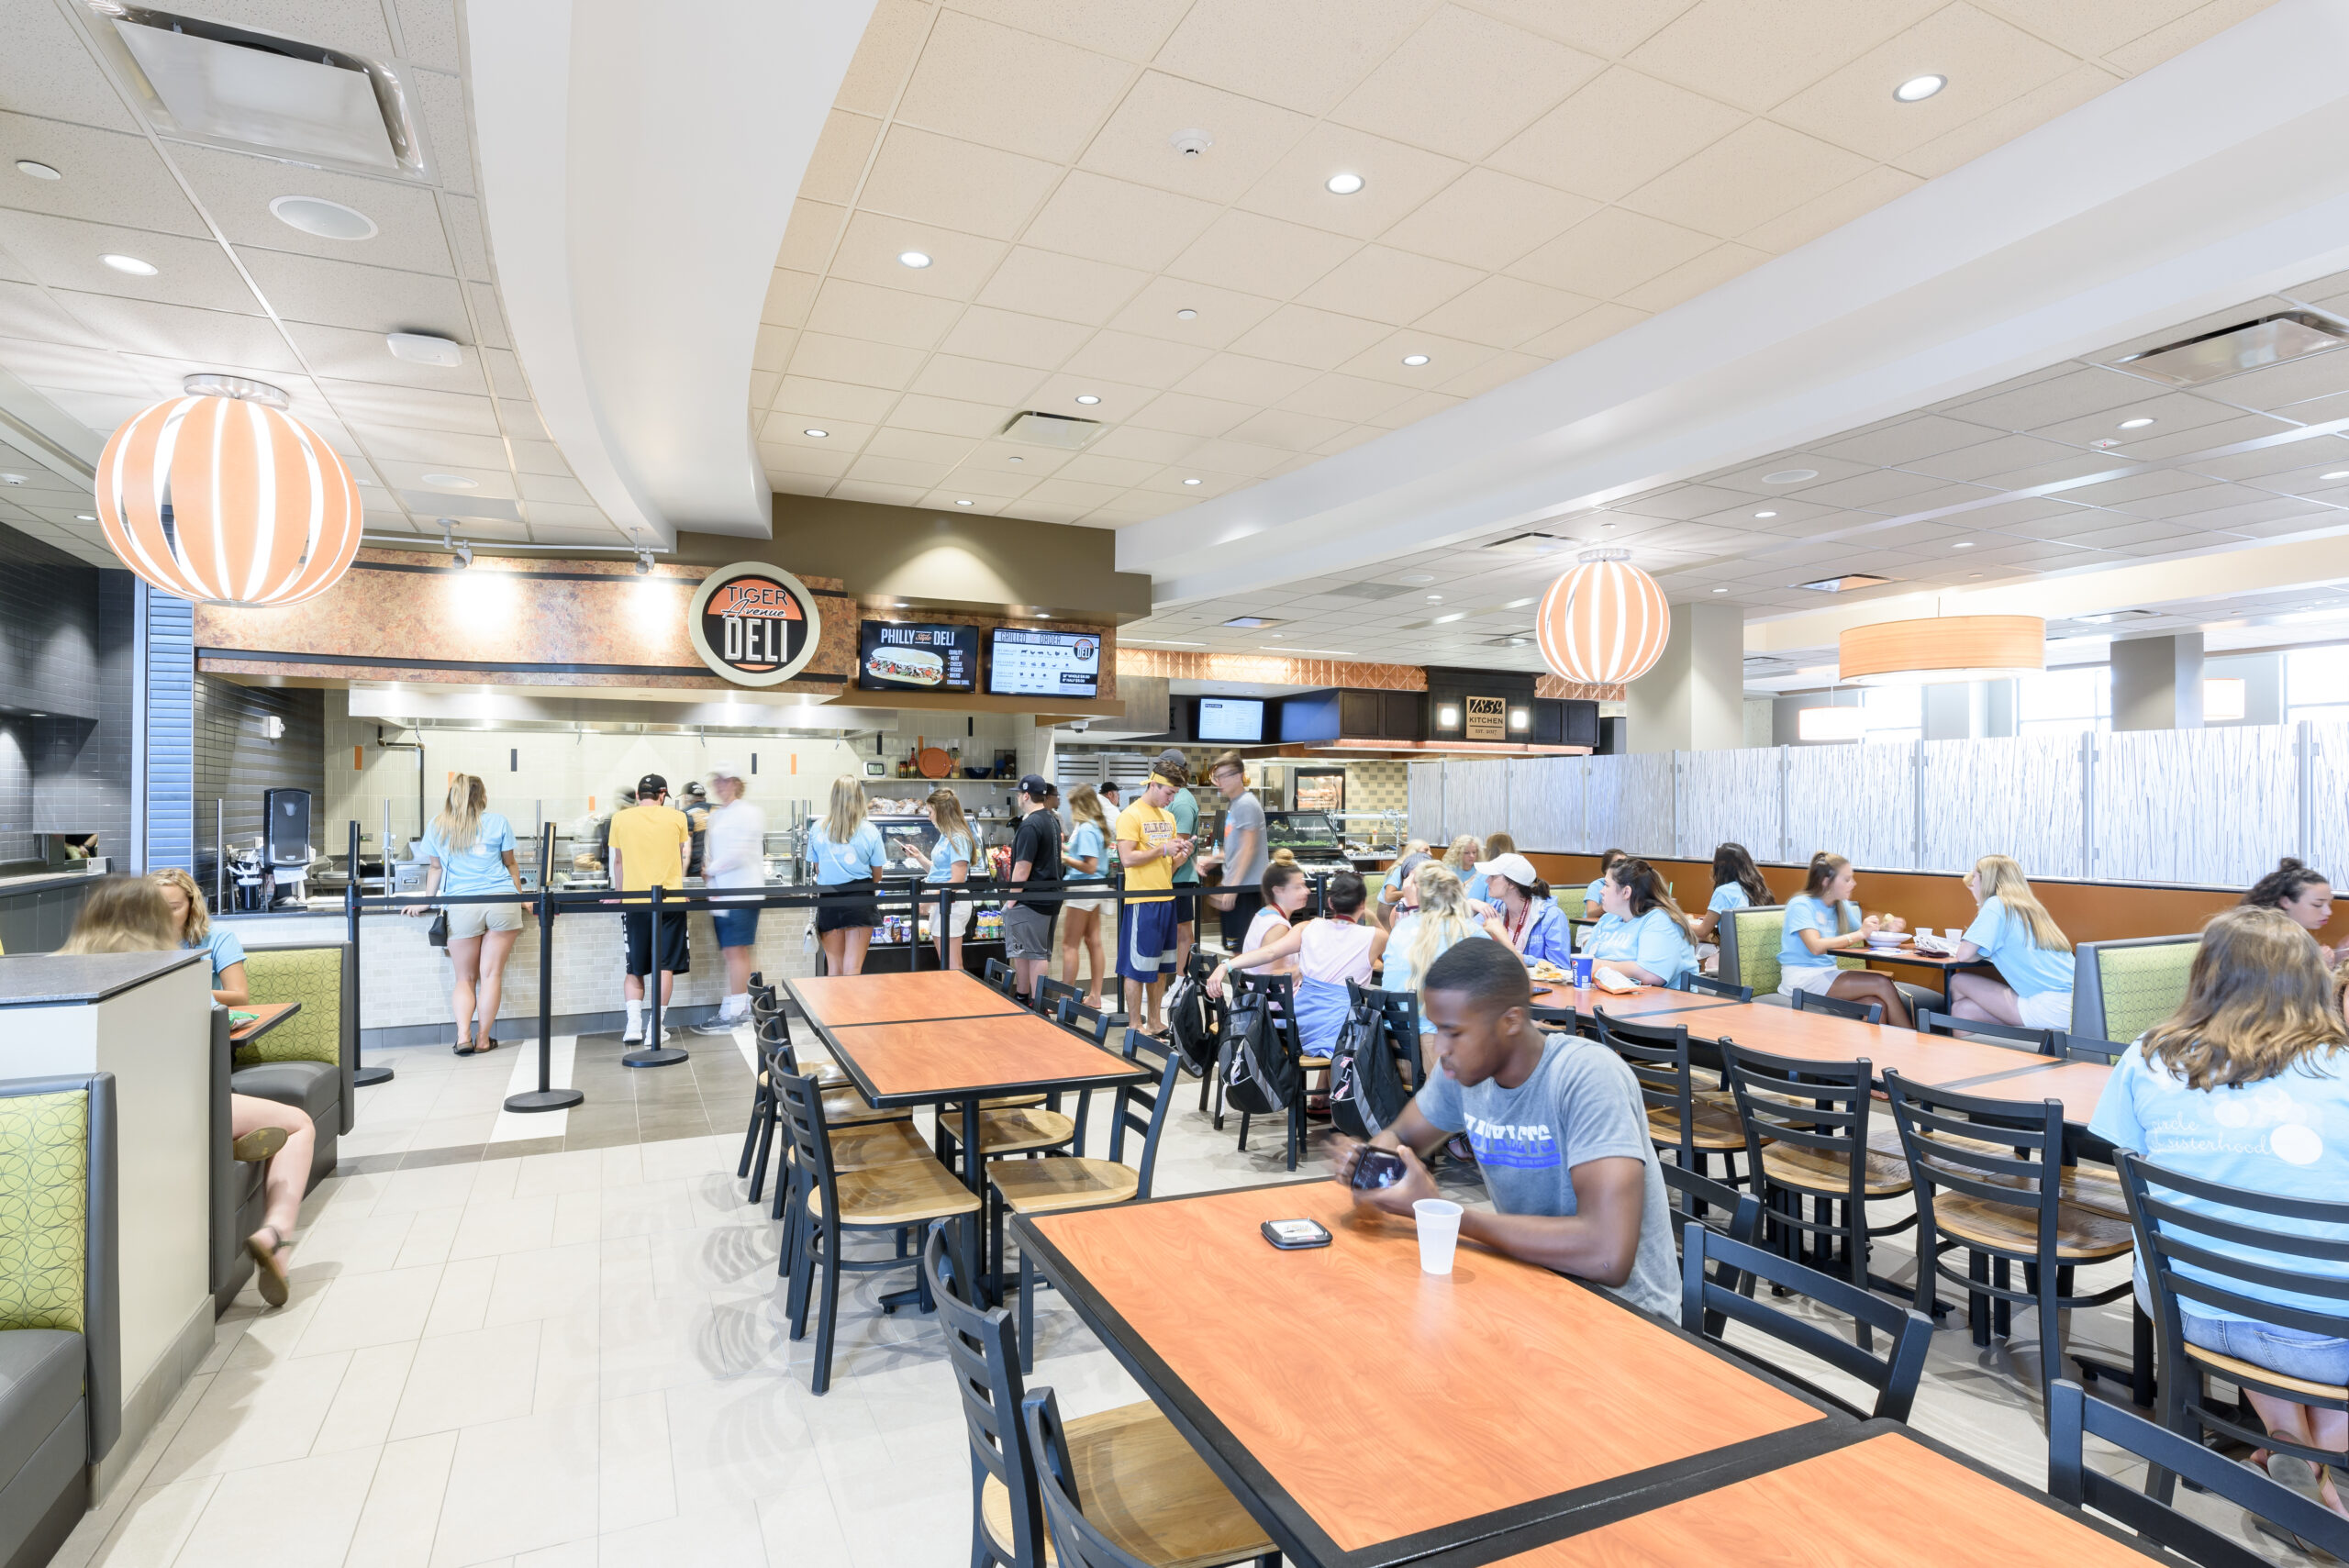 A large number of college students occupy a dining hall, with a station named "Tiger Avenue Deli" serving a large line of people